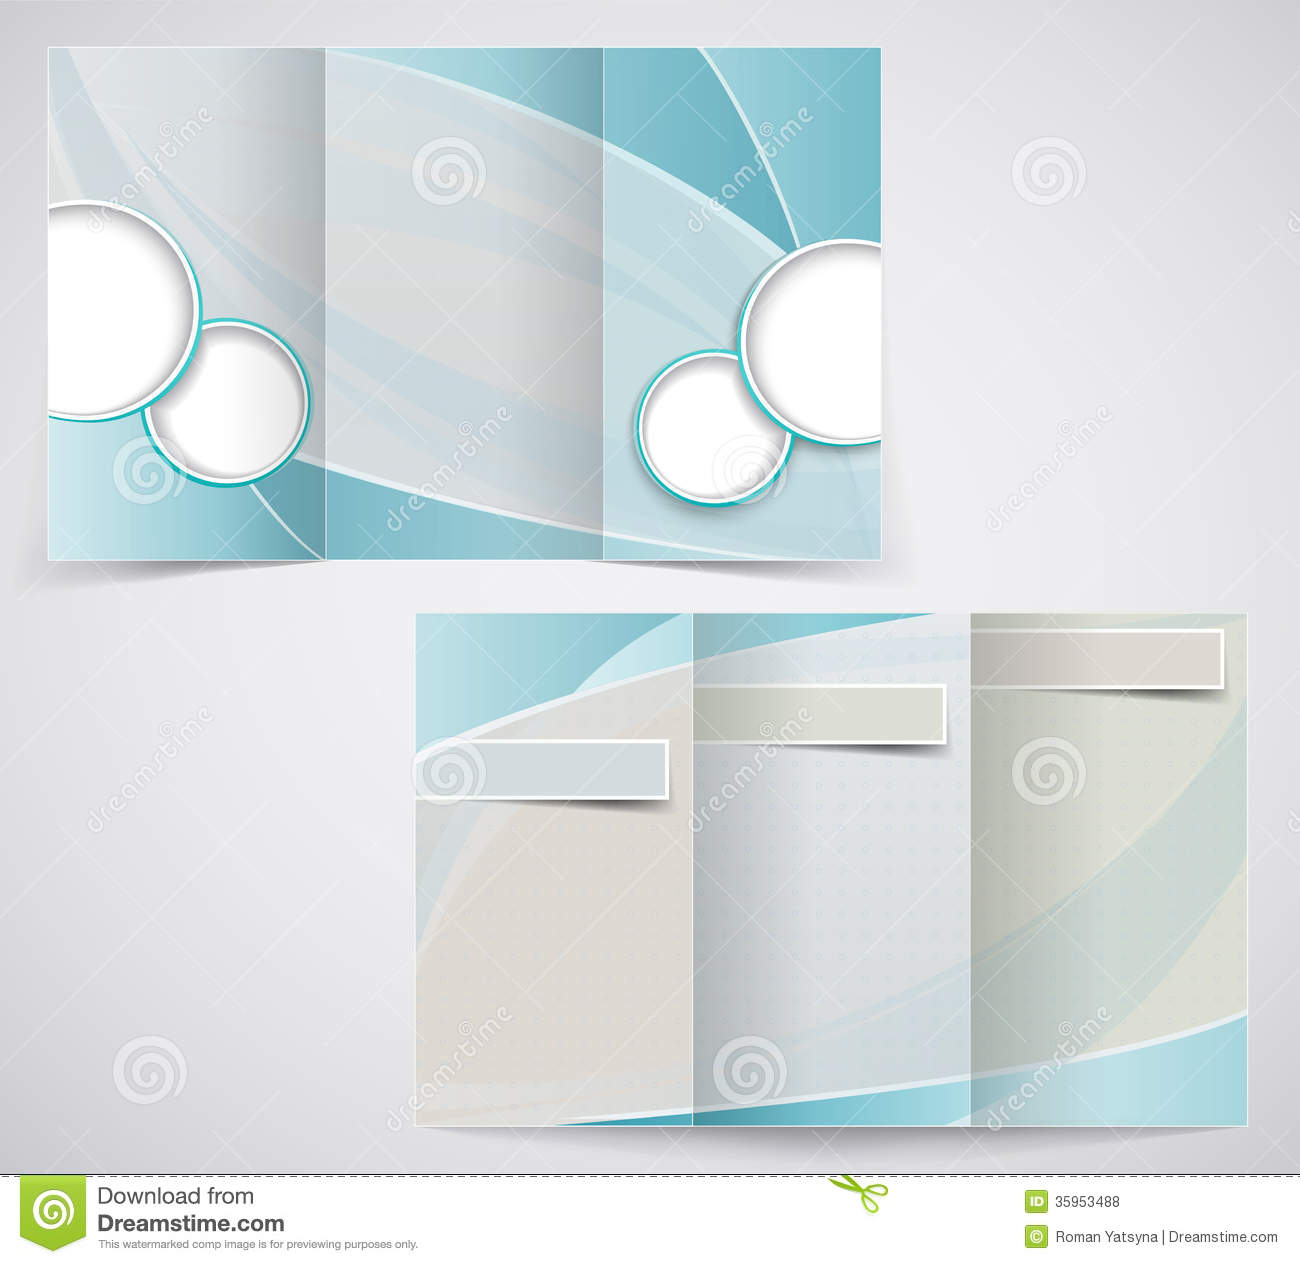 Tri Fold Business Brochure Template, Vector Blue D Stock Within Illustrator Brochure Templates Free Download